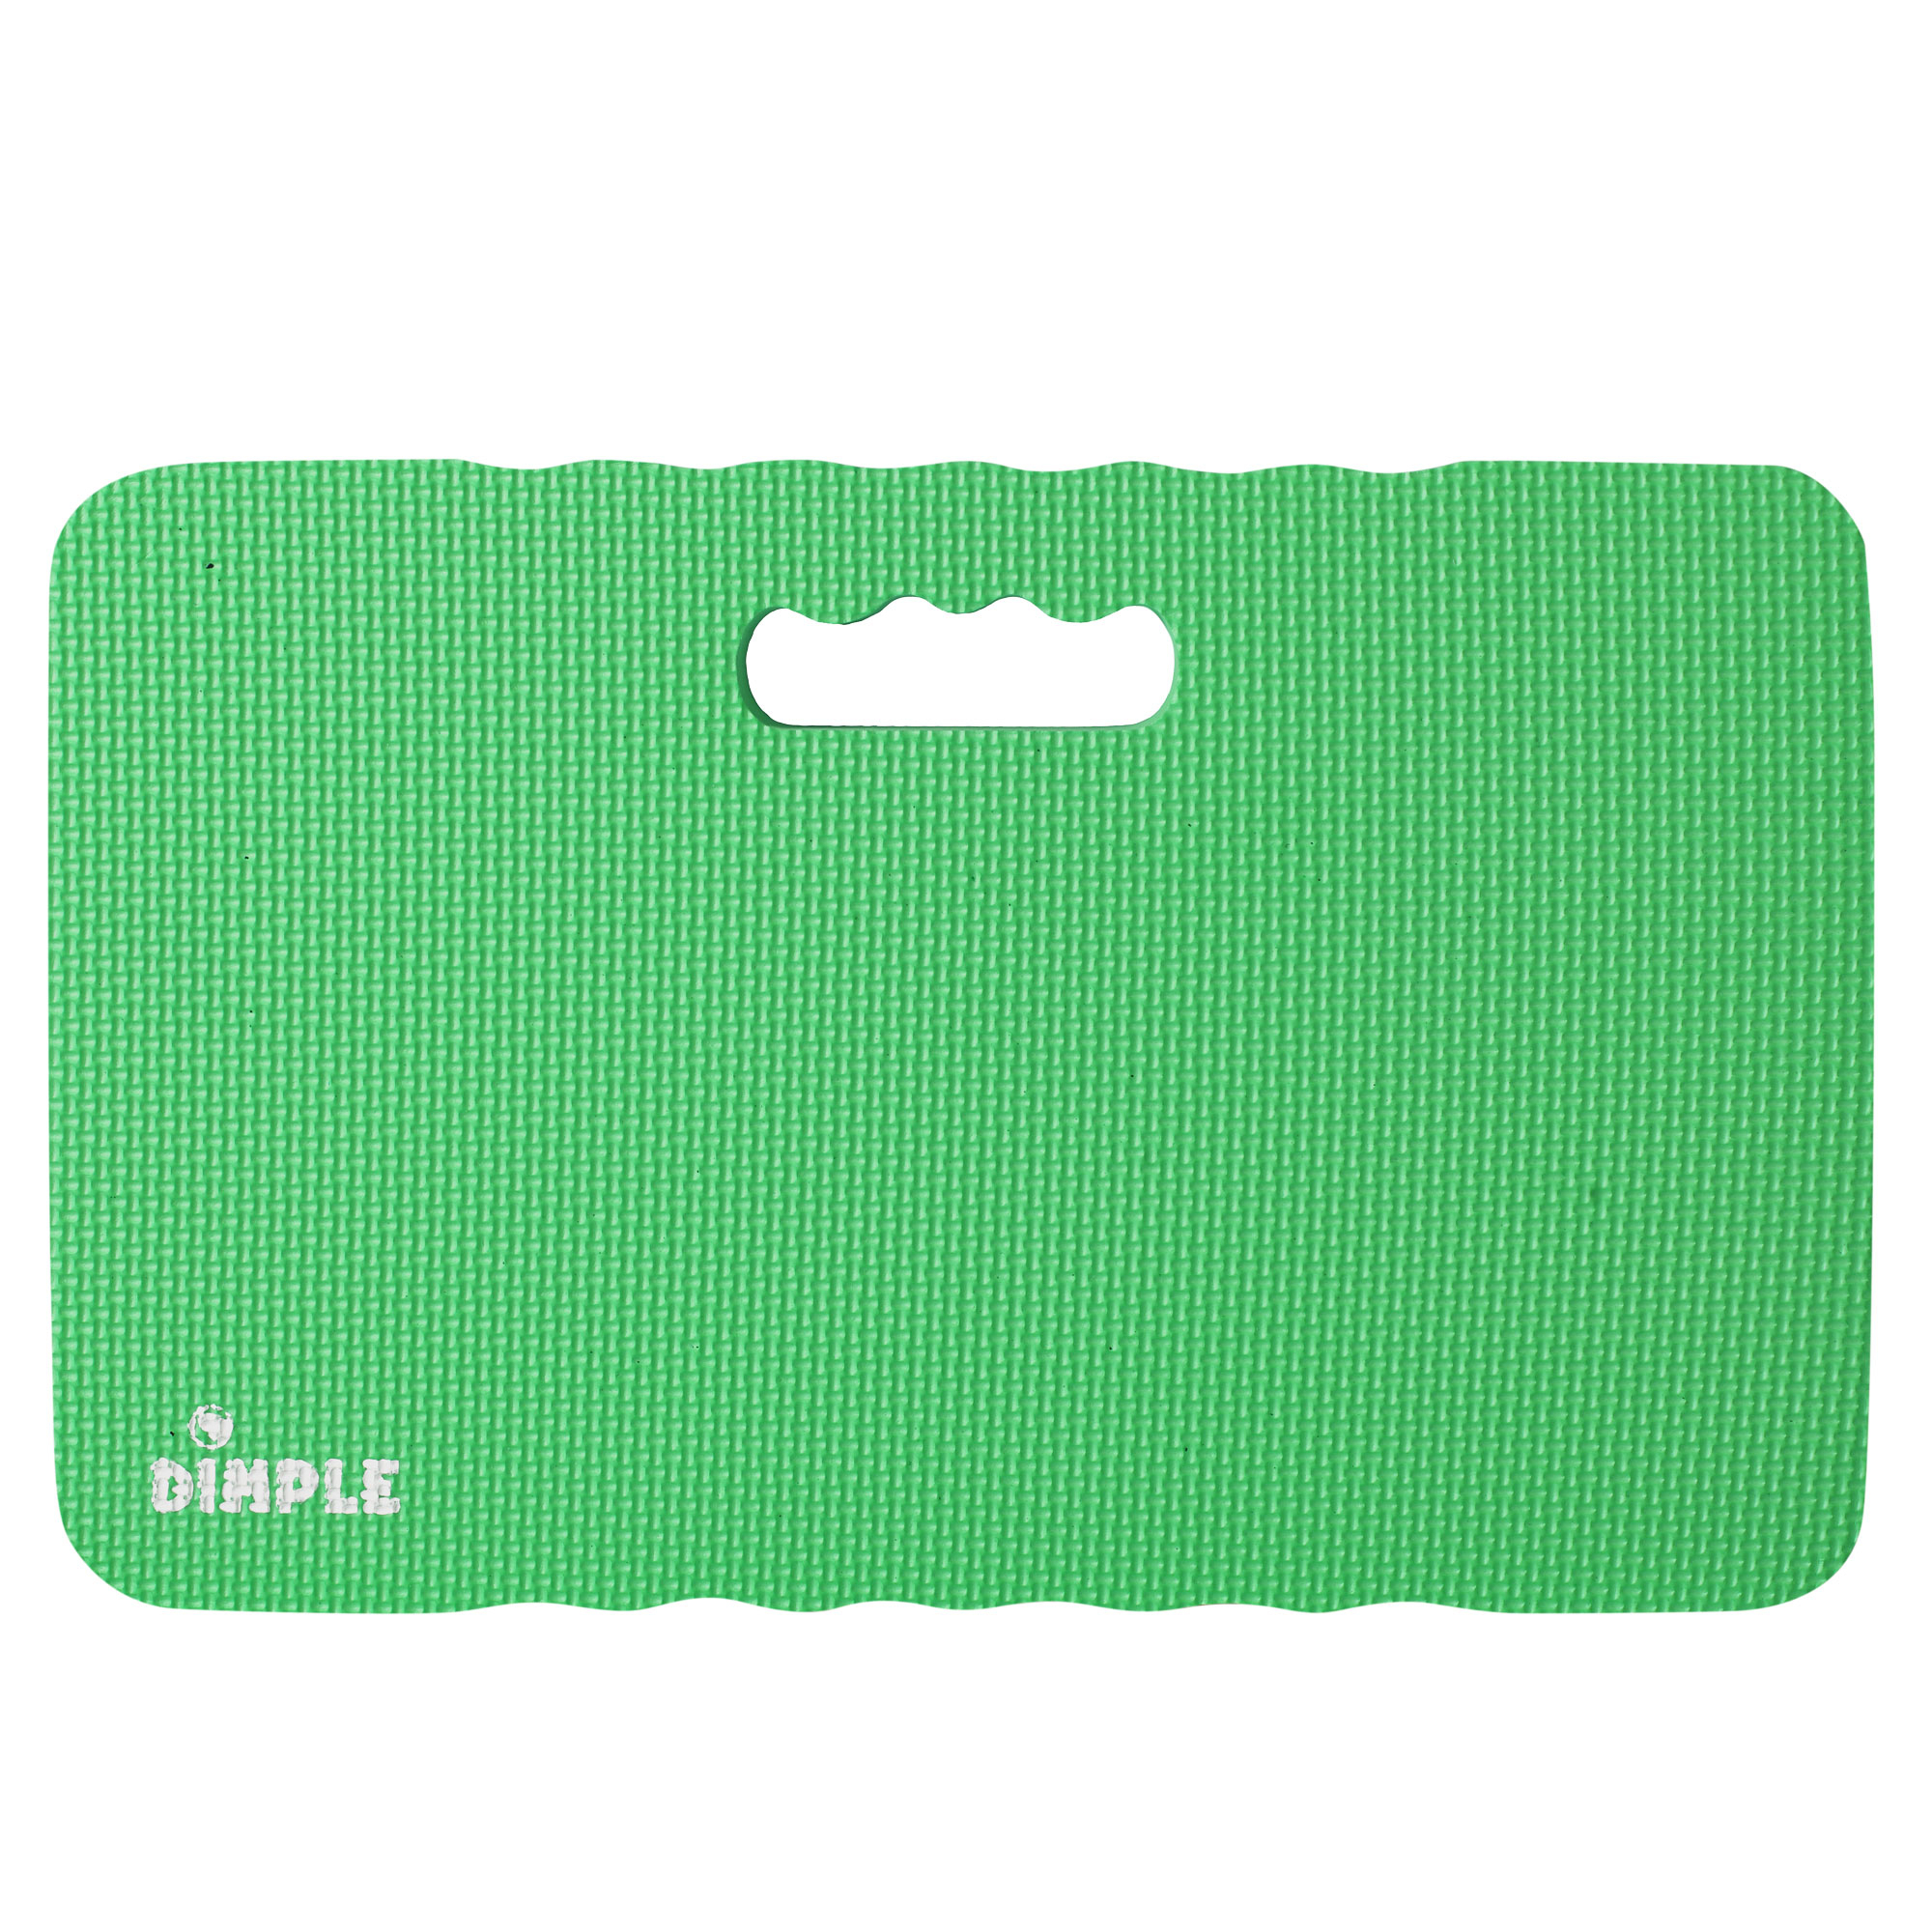 Dimple High Density 1.5 Thick Foam Comfort Kneeling Pad Mats For Gardening Knee Support, Exercise, Yoga Mat, Garden Cushions (Green)